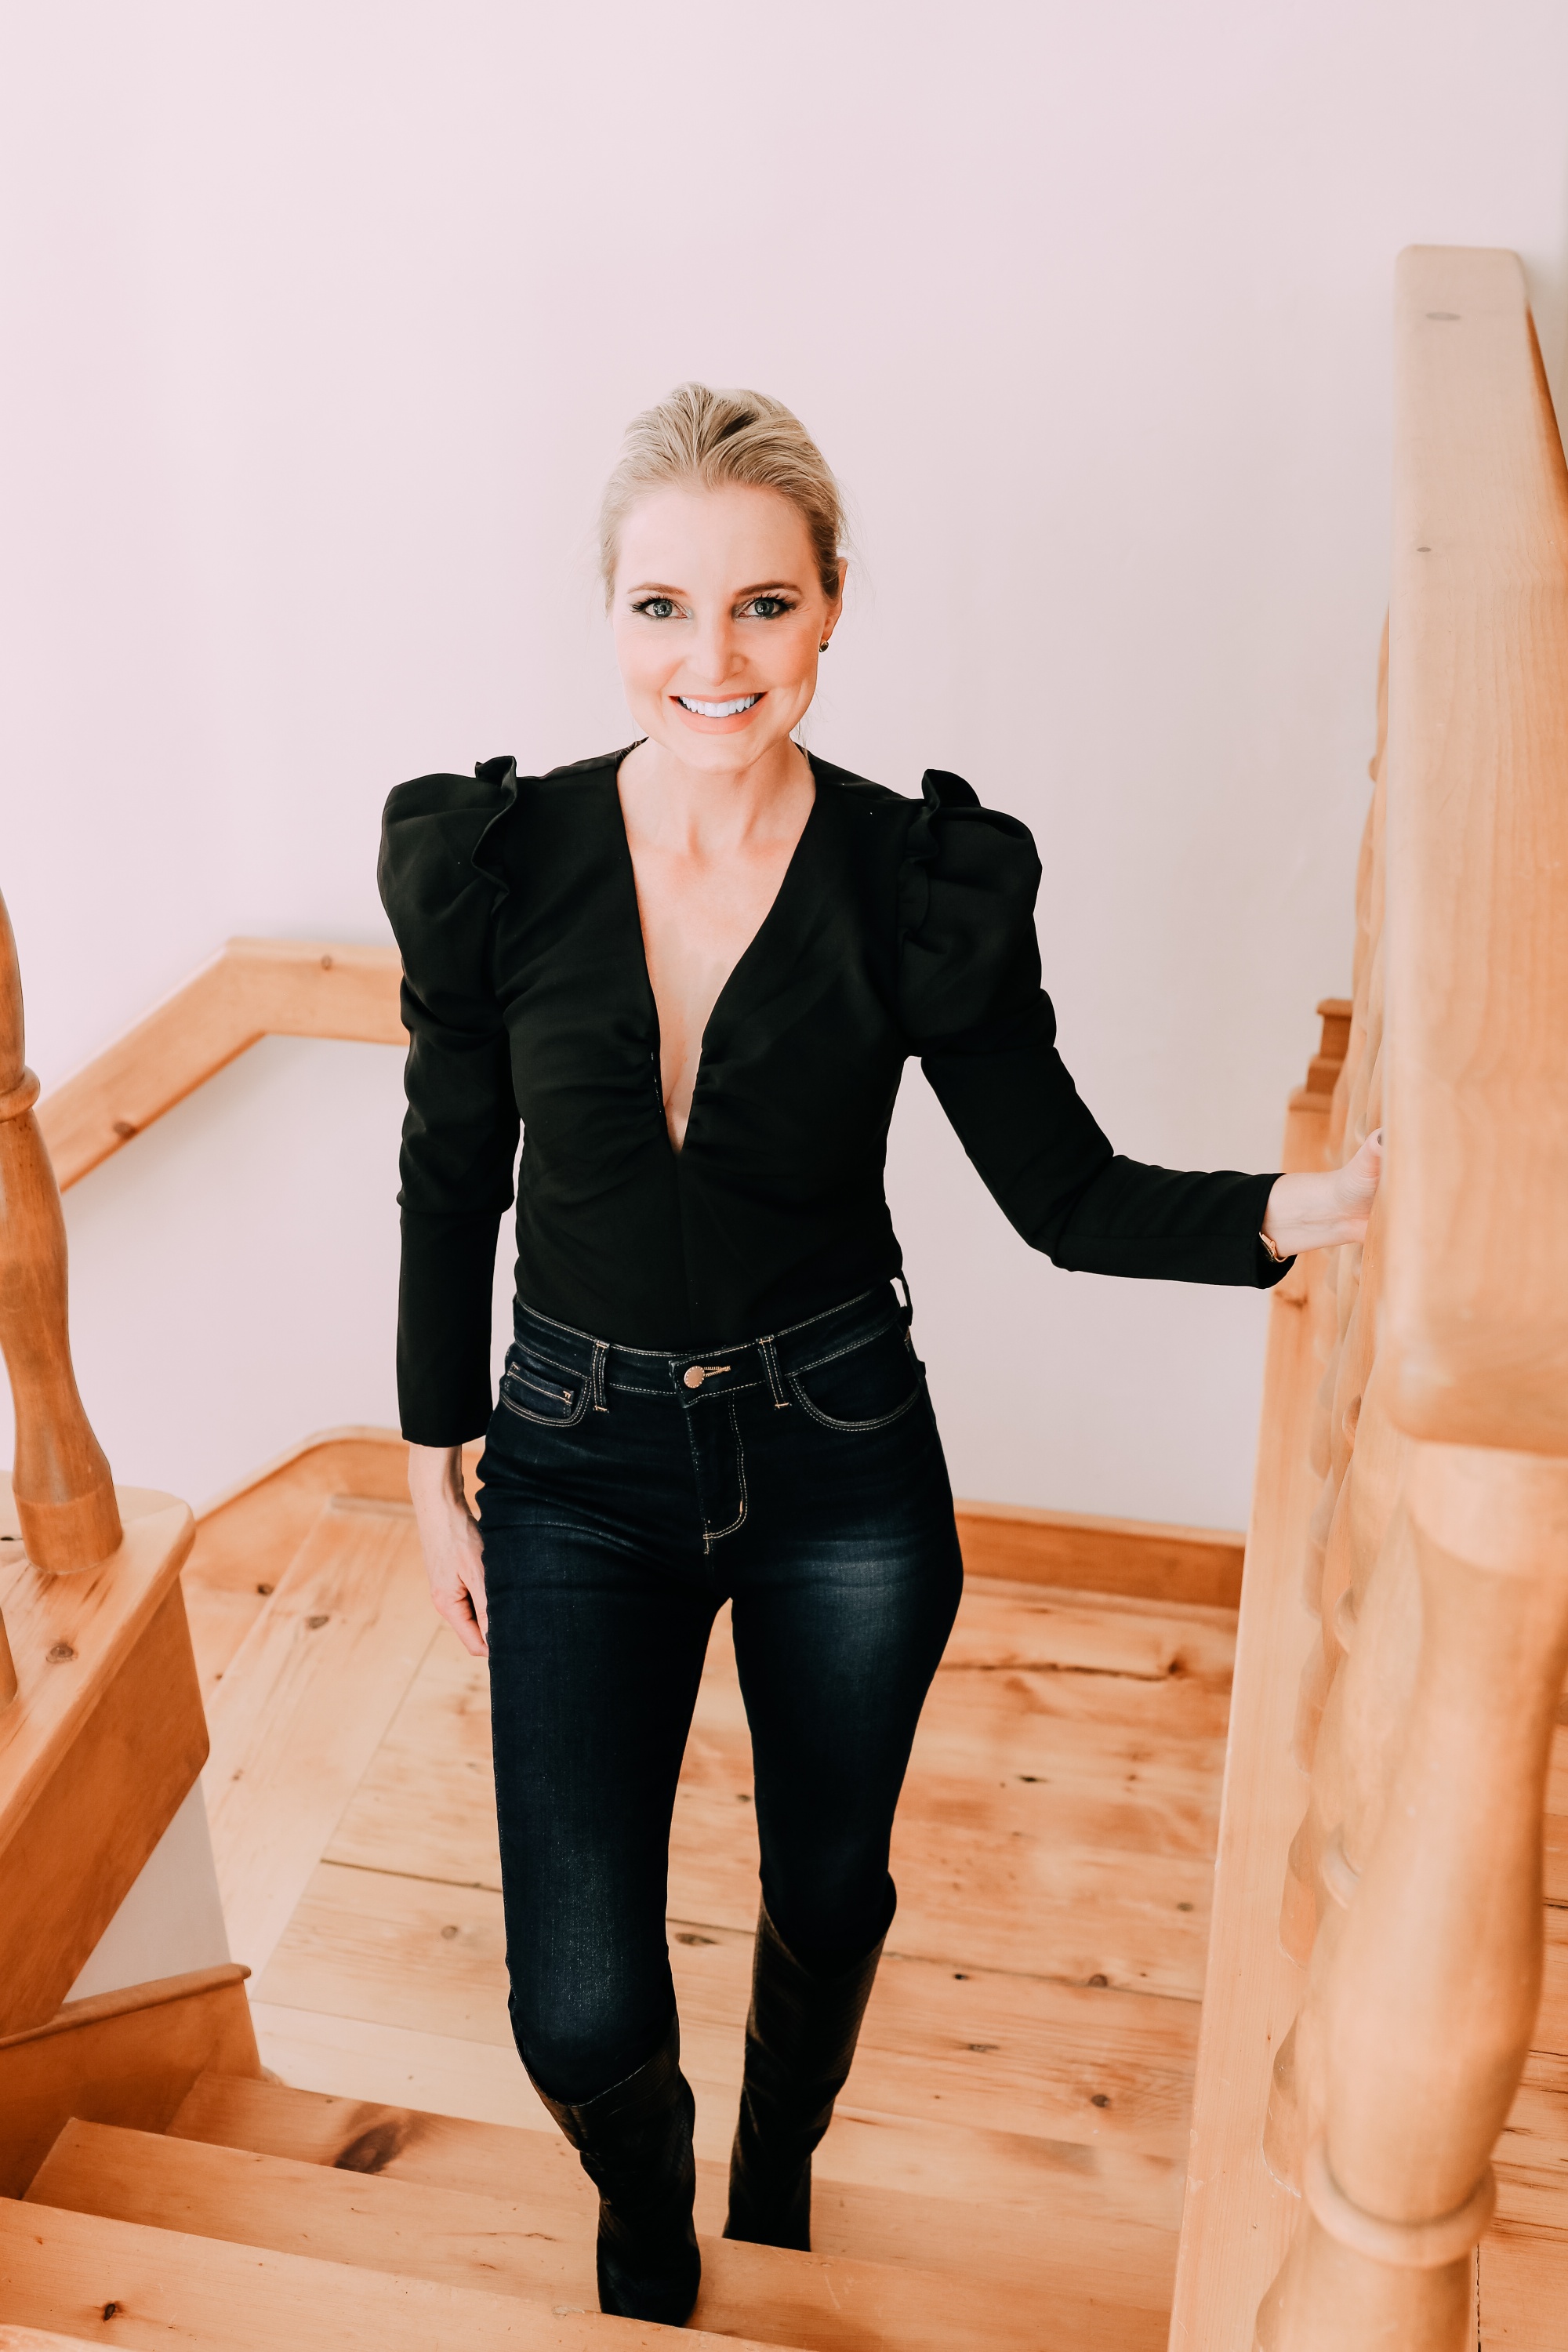 Holiday Outfits With Jeans, Erin Busbee of Busbee Style wearing a black ASTR the Label puff sleeve bodysuit, L'Agence dark wash skinny jeans, and black snake embossed boots by Schutz from Nordstrom in Telluride, Colorado